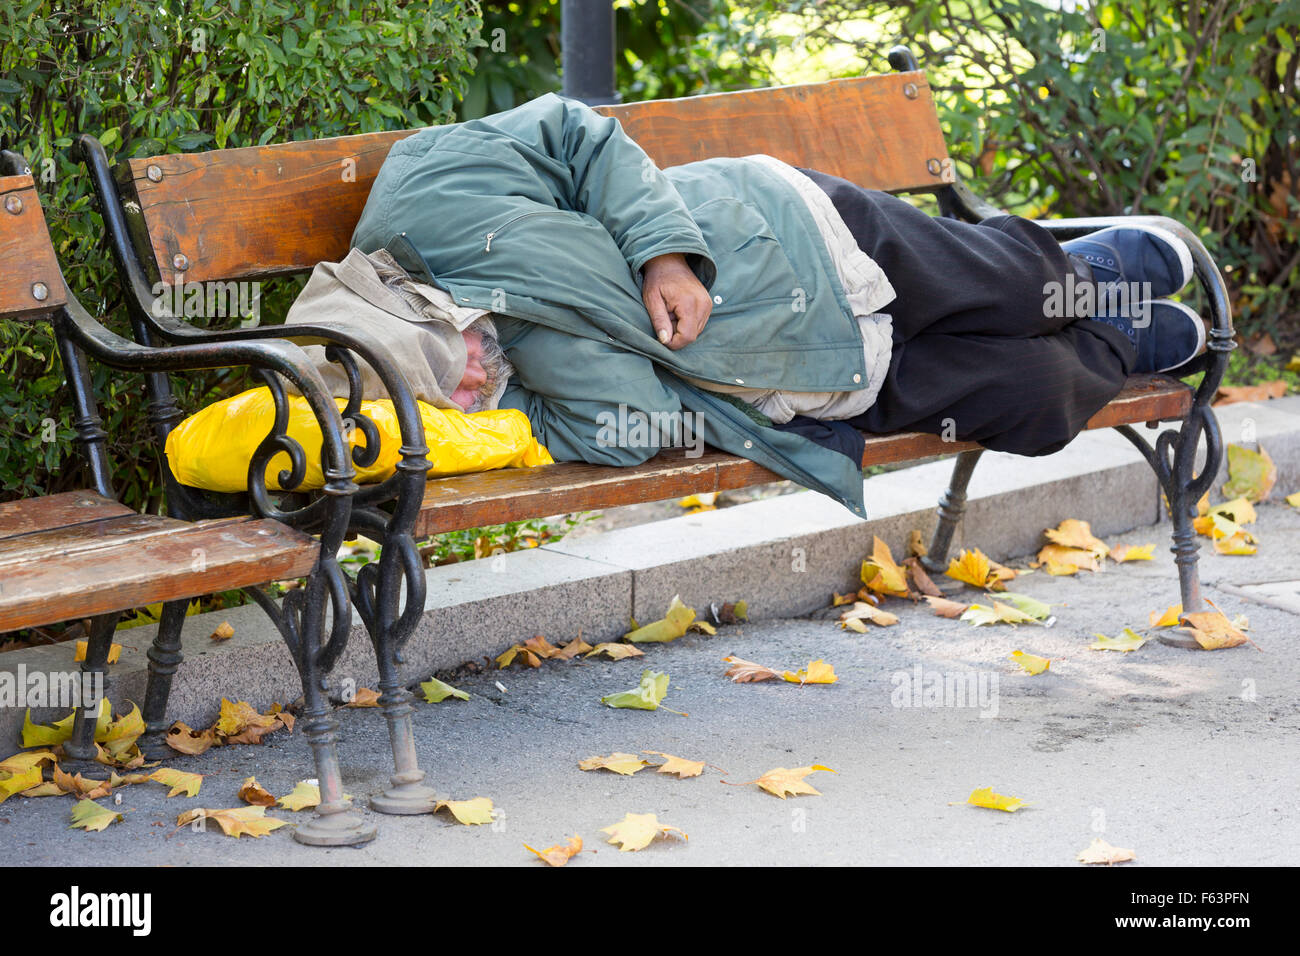 Homeless Person Is Sleeping On A Bench In A Cold Autumn Day In A Park In European Union S Poorest Country Bulgaria Stock Photo Alamy